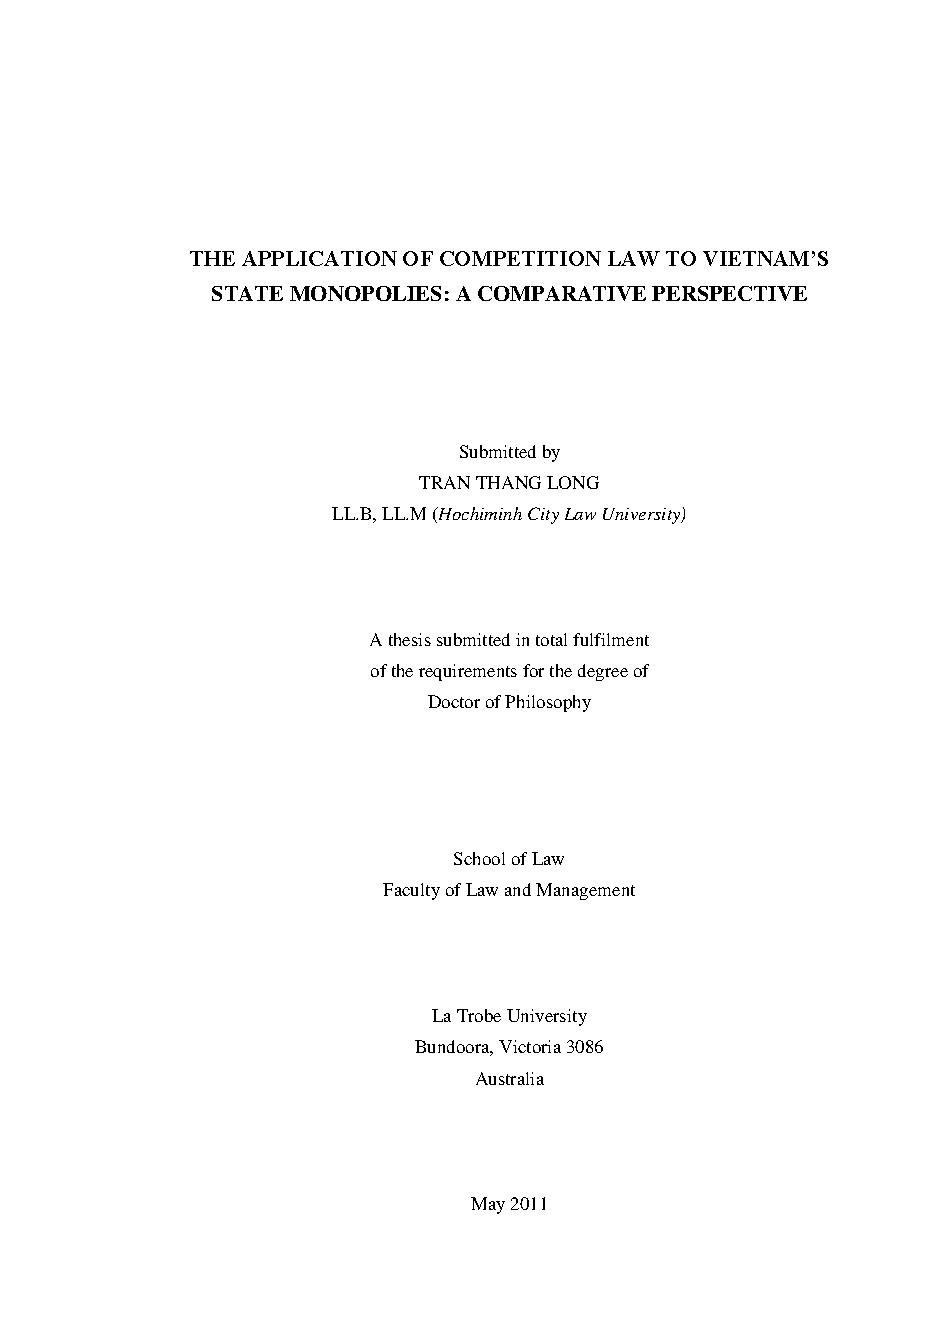 Application of competition law to Vietnam's satate monopolies: a comparative perspective